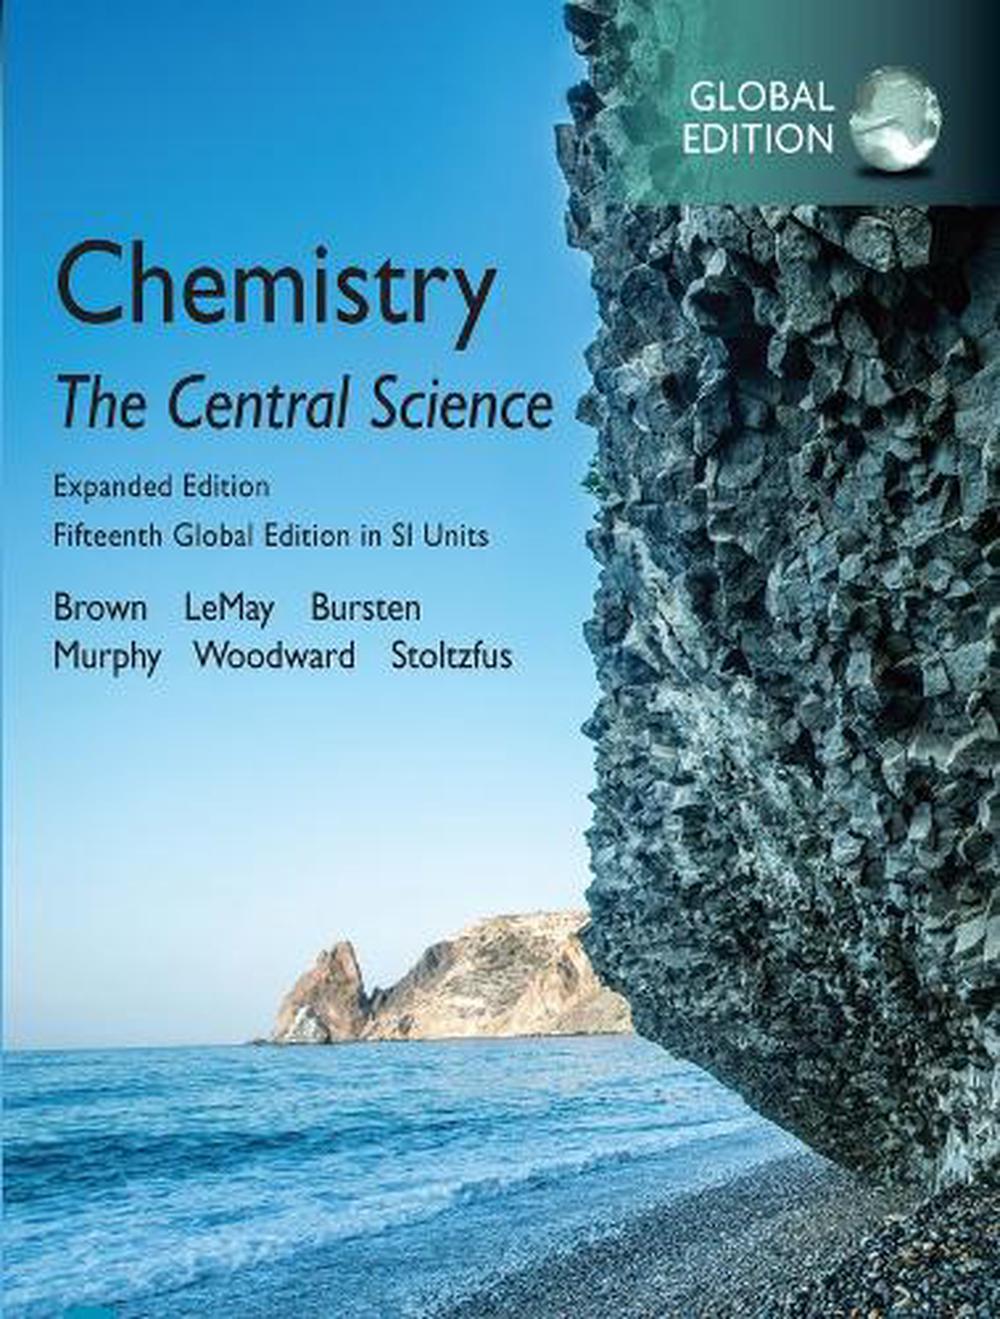 Chemistry:　Global　Expanded　Science　Units,　15th　Brown,　Edition　at　by　online　Theodore　Buy　in　9781292408767　The　Nile　The　Edition,　Edition,　Central　SI　Paperback,